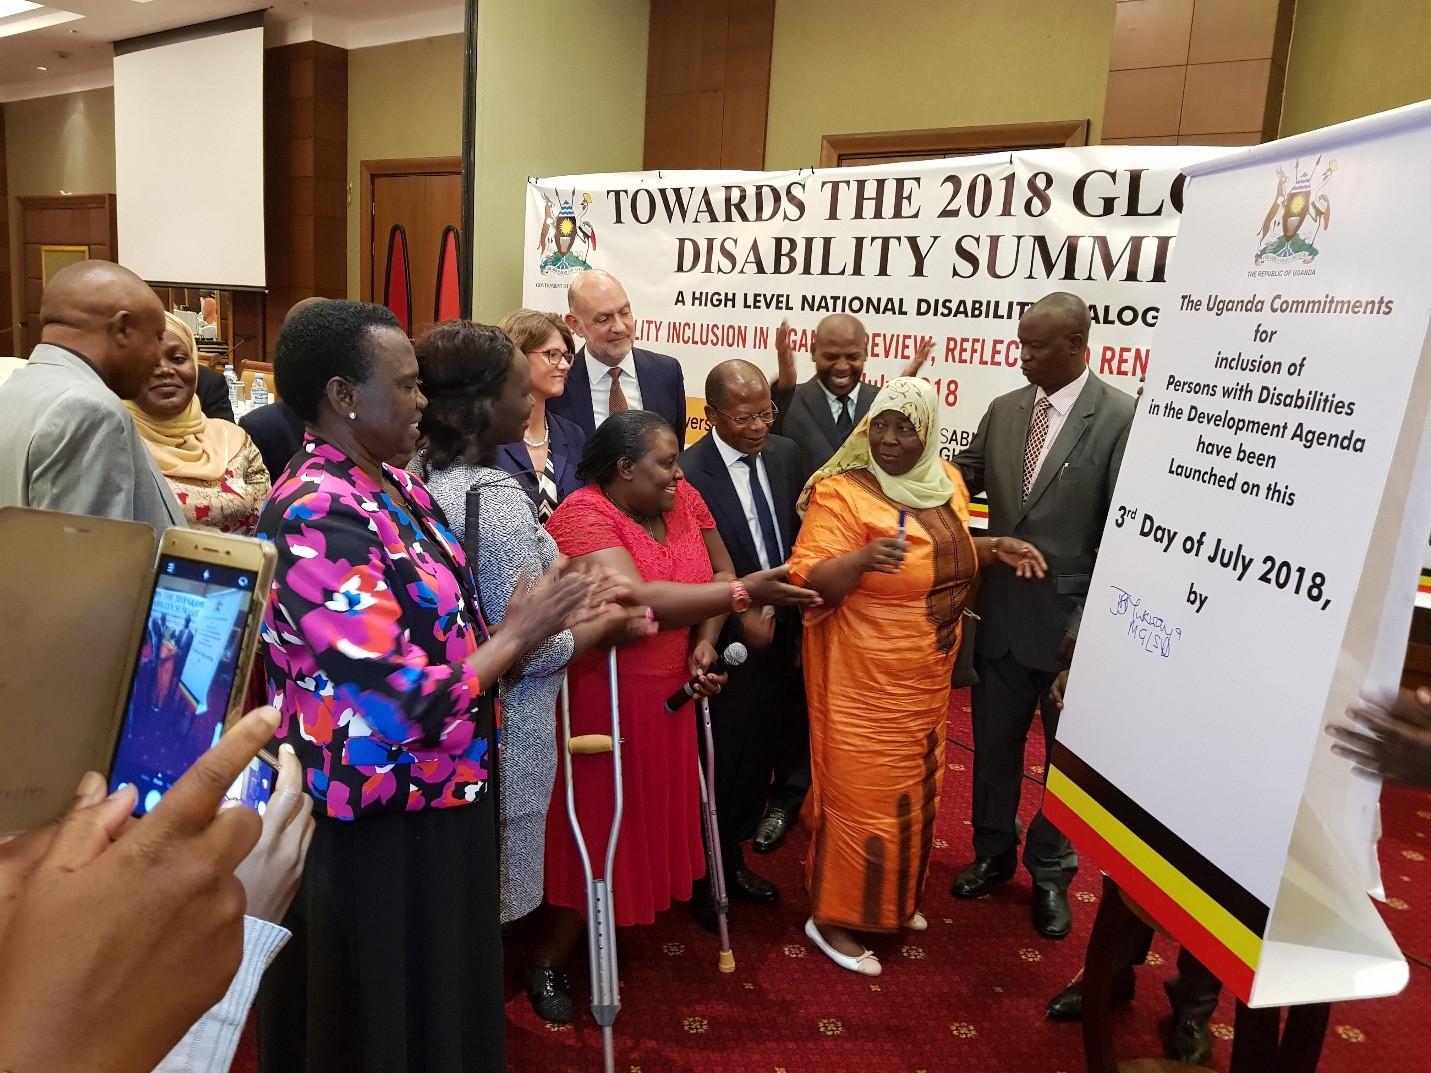 signature in acknowledgement of the Uganda Commitments for Inclusion of Persons With Disabilities in the development Agenda